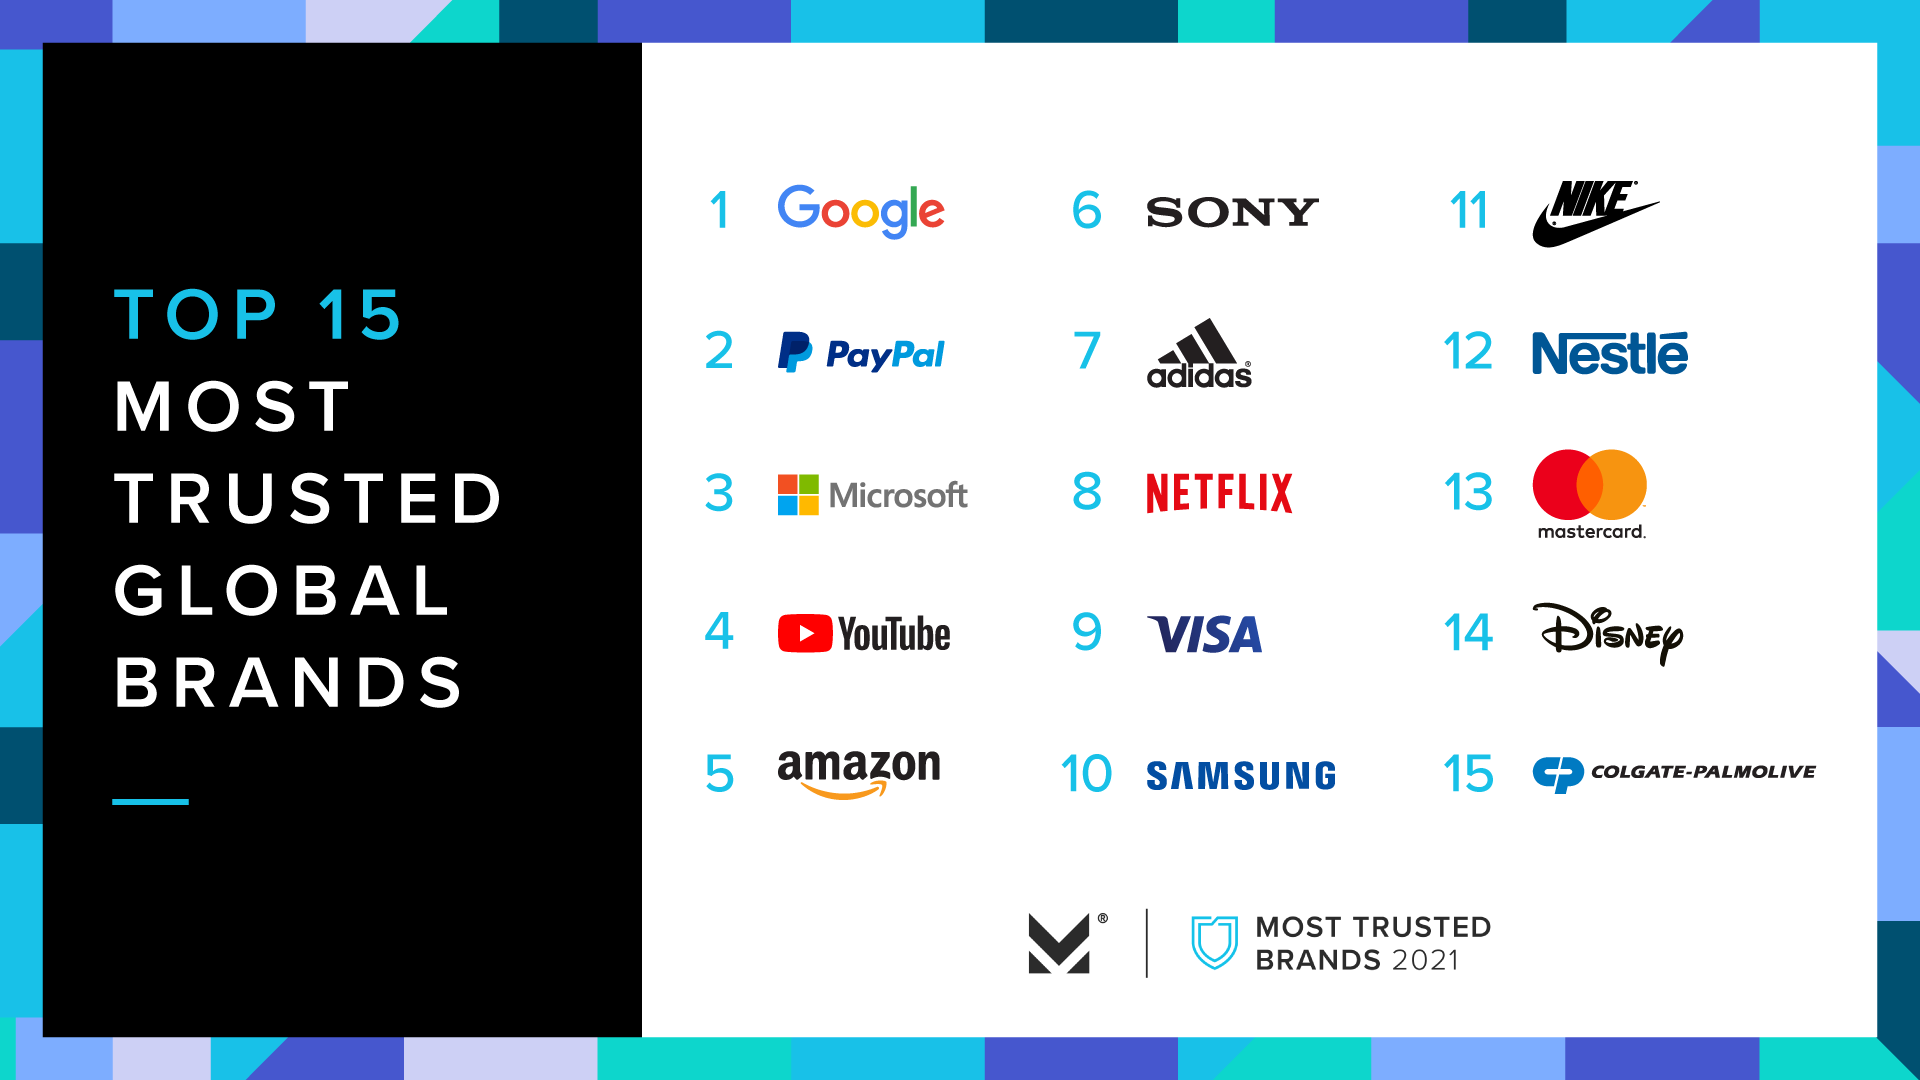 Morning Consult on Twitter: "2021's Top 15 Most Trusted Global 1. @Google 2. @PayPal 3. @Microsoft 4. @YouTube @amazon 6. @Sony 7. @adidas 8. @netflix @Visa @Samsung 11. @